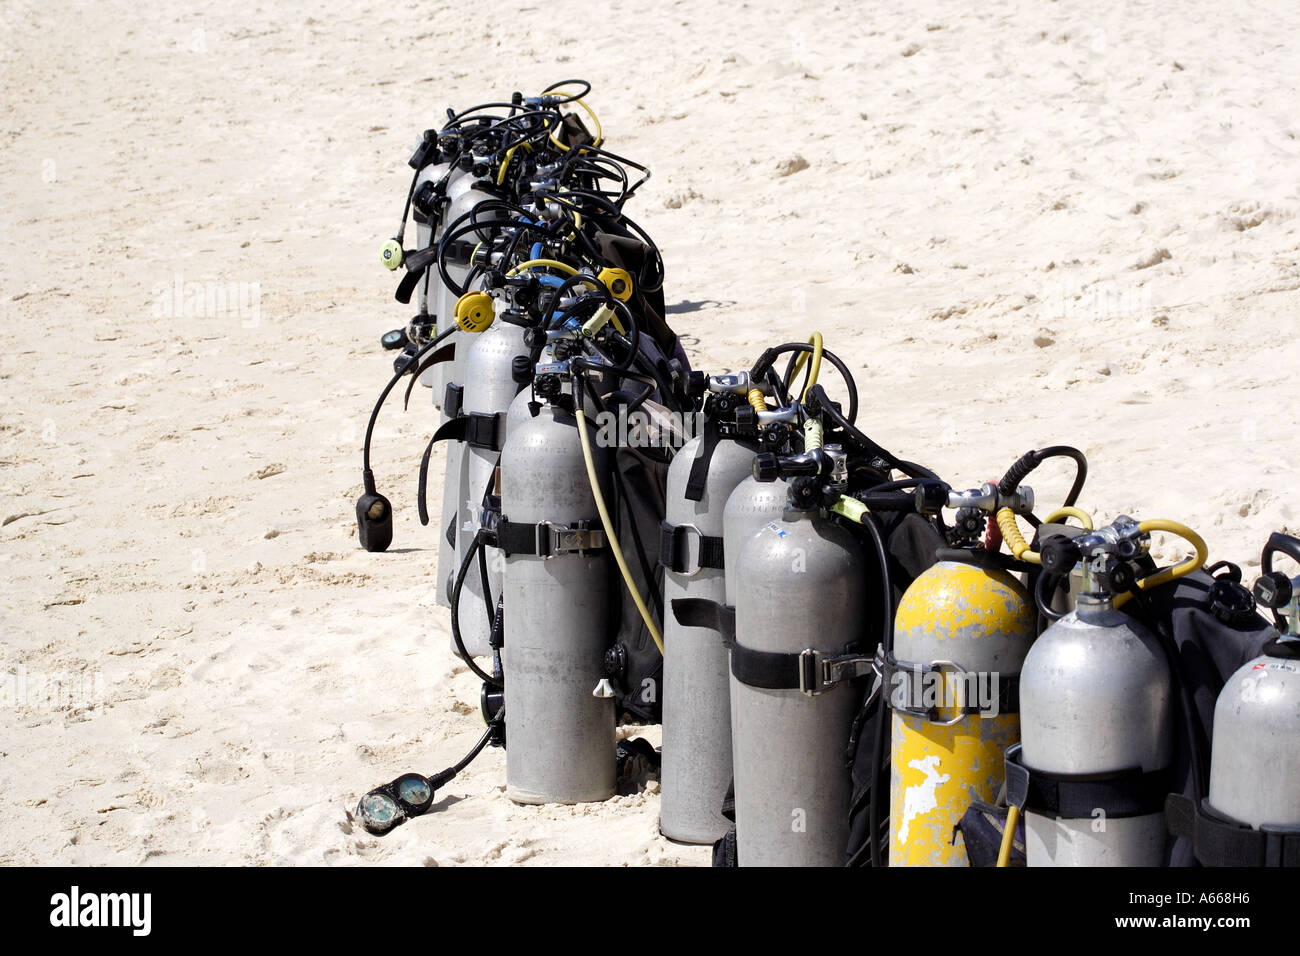 A row of dive tanks on a white sandy beach in Boracay, Philippine Islands Stock Photo